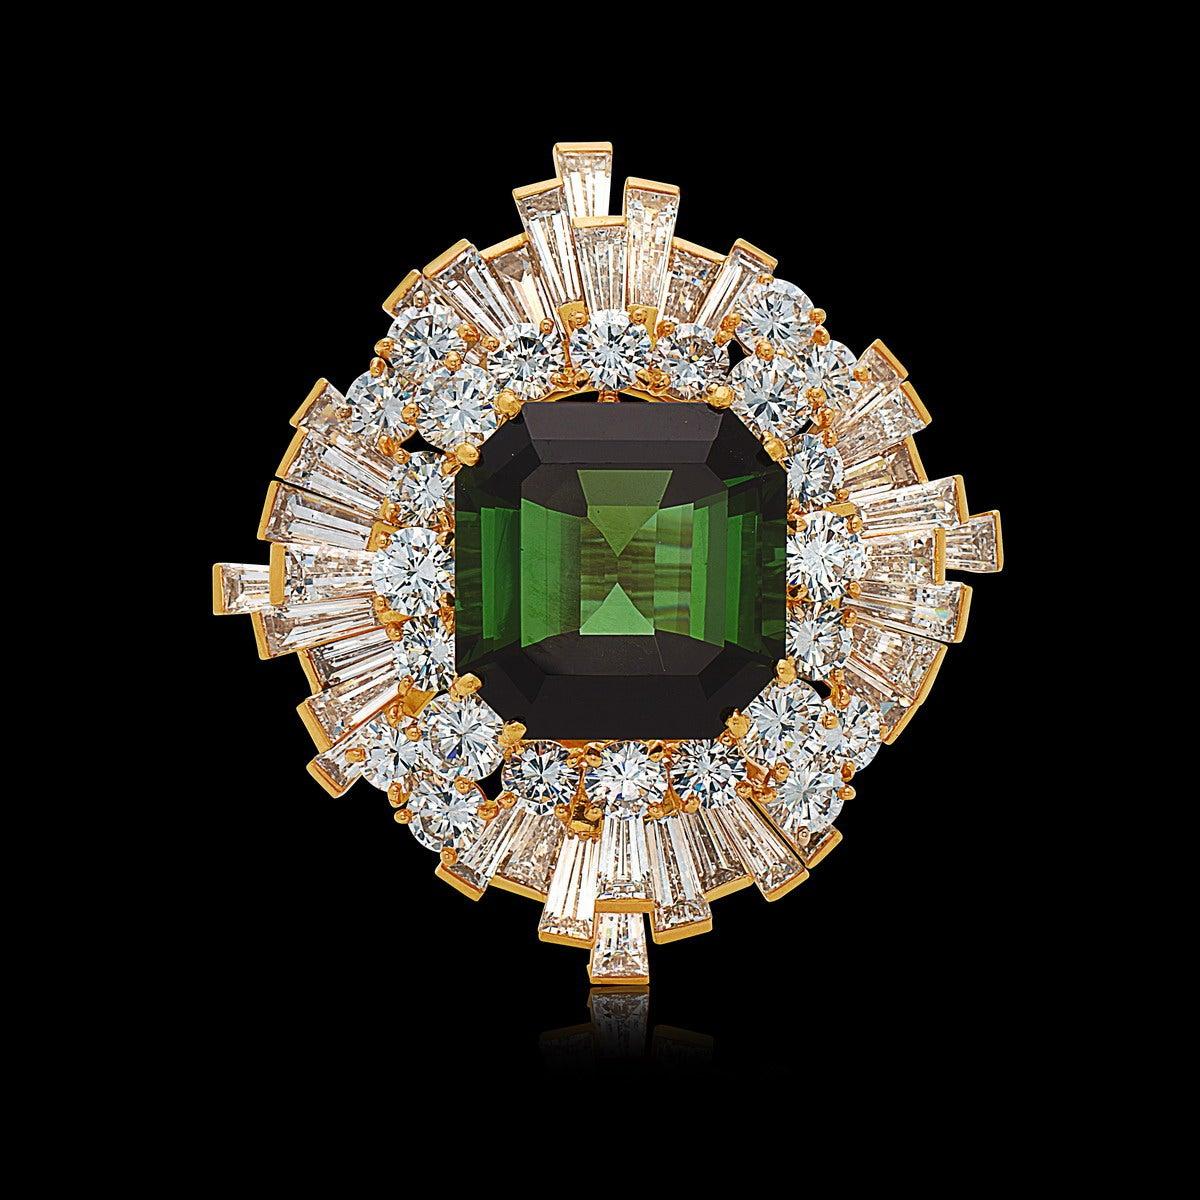 Contemporary Vintage Fred Paris 21.71 Carat Green Tourmaline Diamond Cocktail Ring For Sale